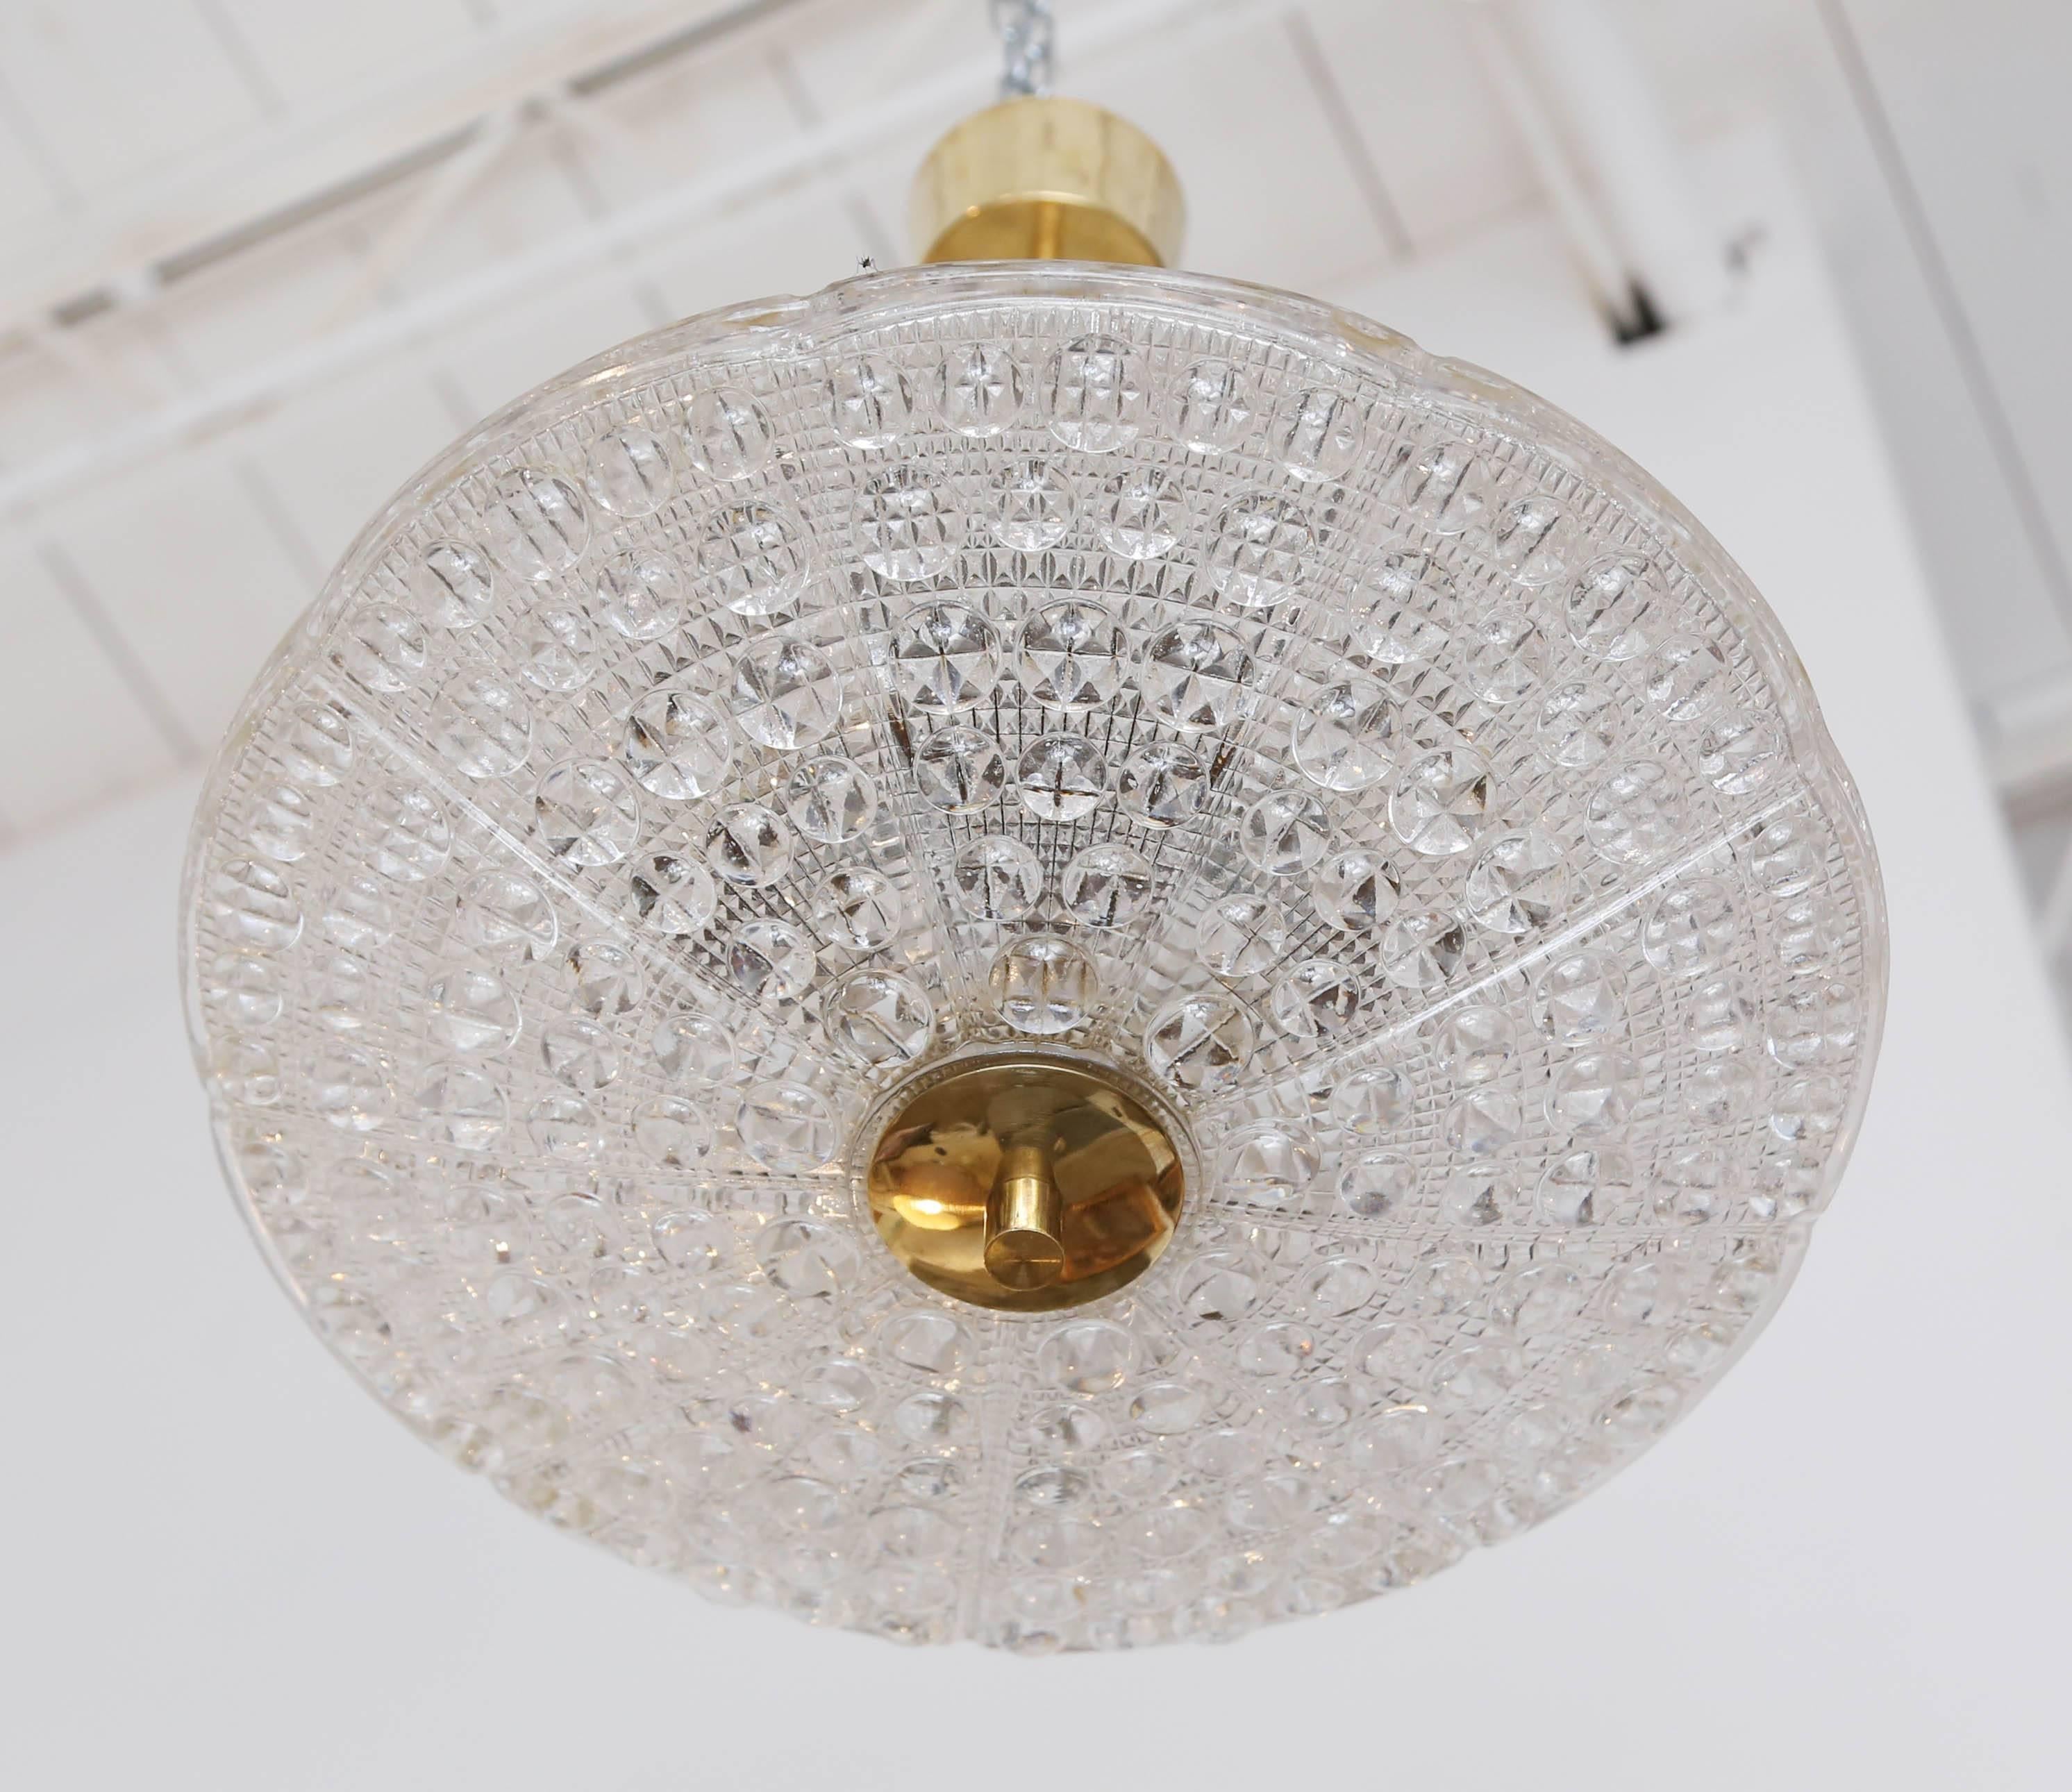 Carl Fagerlund for Orrefors bubble crystal duel disc chandelier, circa 1960s.
Classic Orrefors round carved textured and bubble round glass shades with
brass stem, canopy and bottom finial. Fixture has been cleaned and rewired
to US standard,